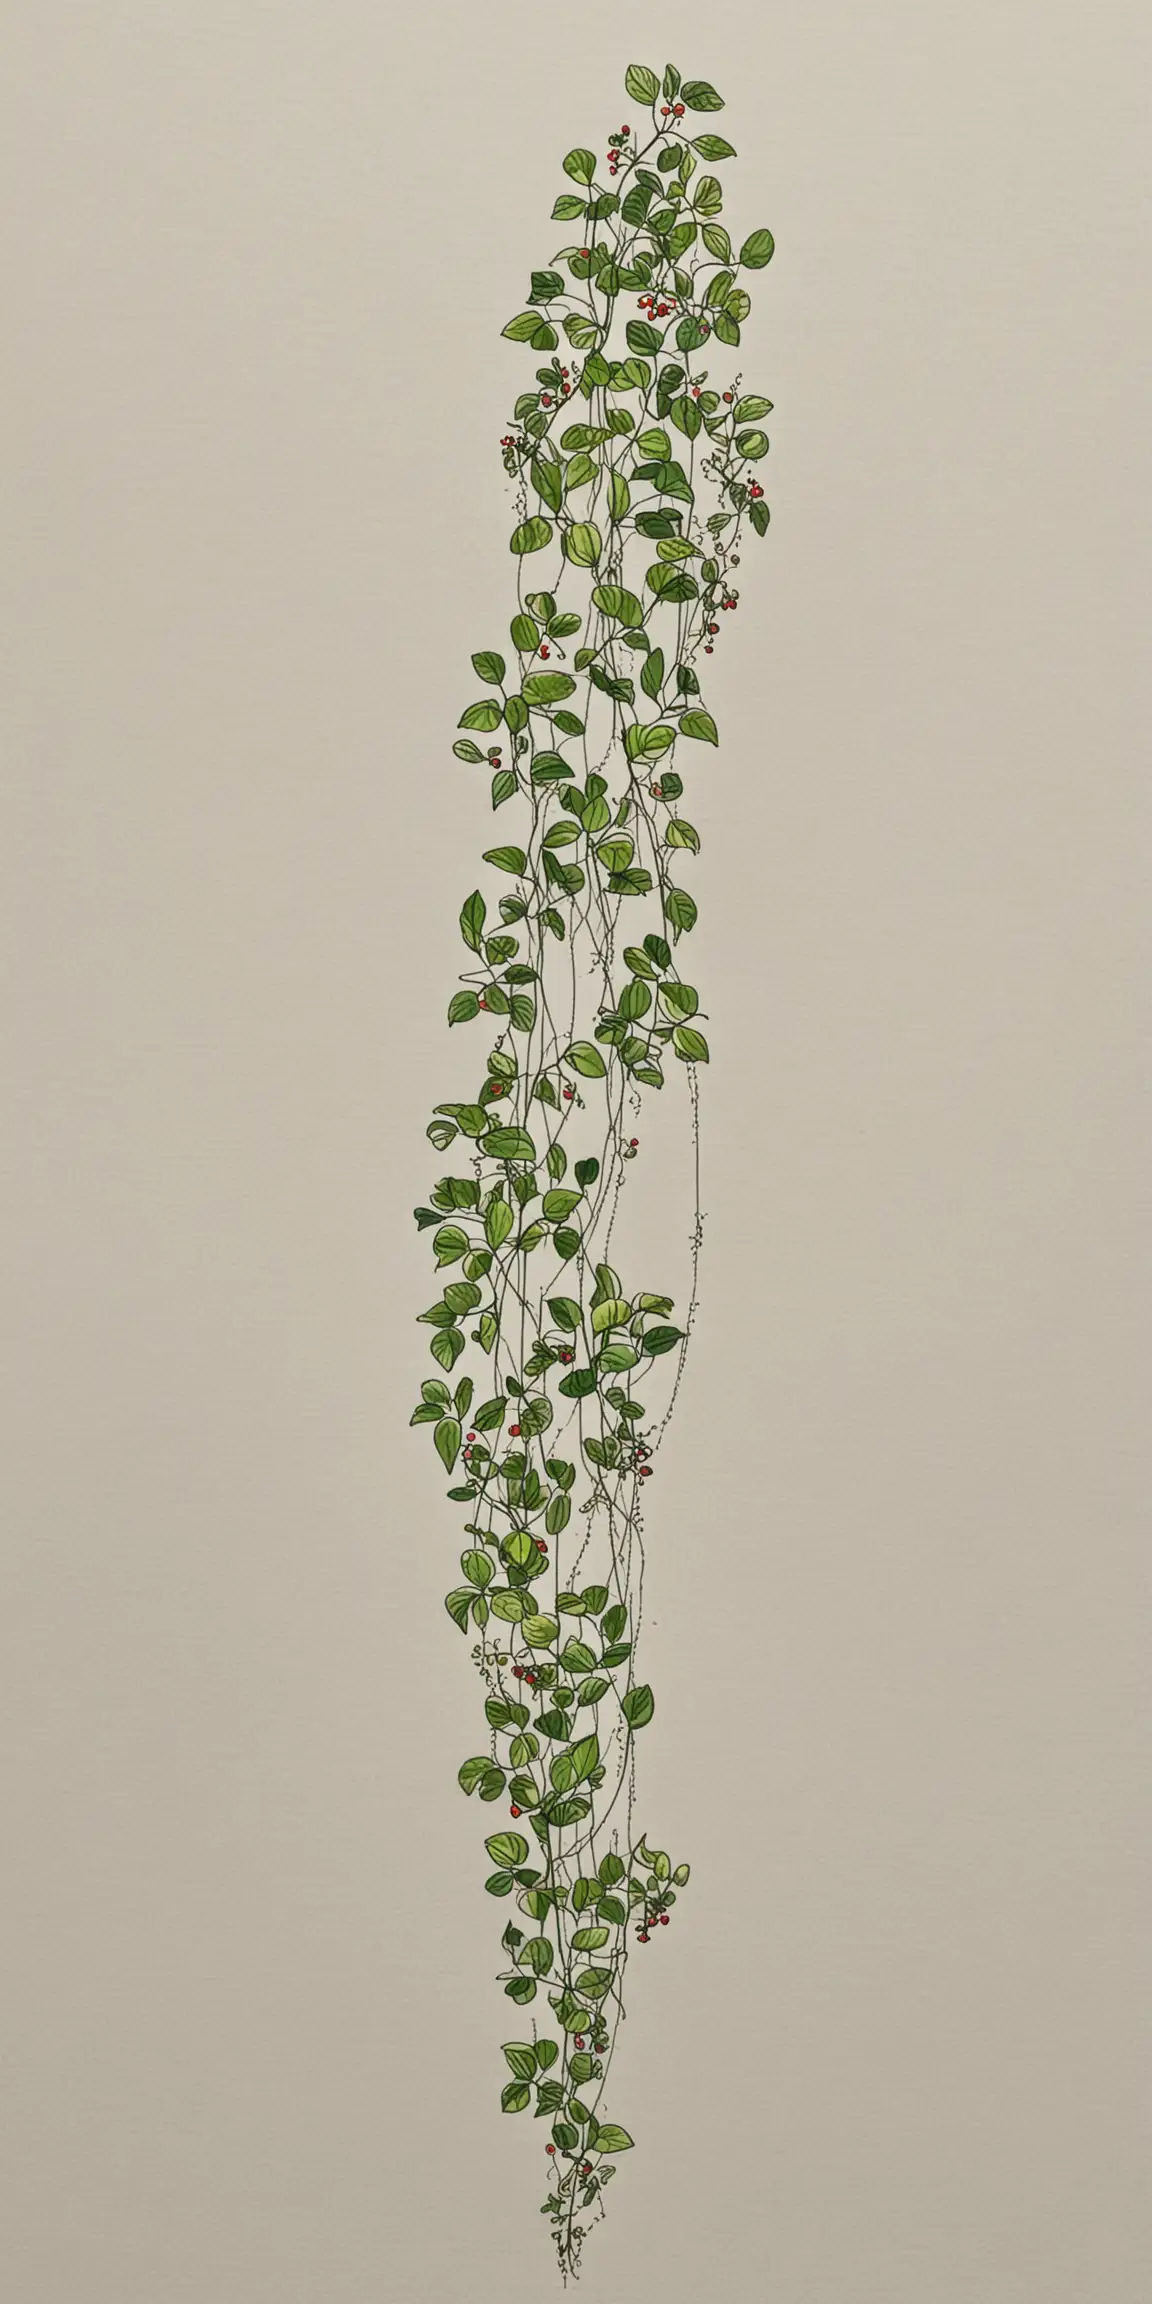 Draw a climbing plant, no frame, trailing from top to bottom, no background